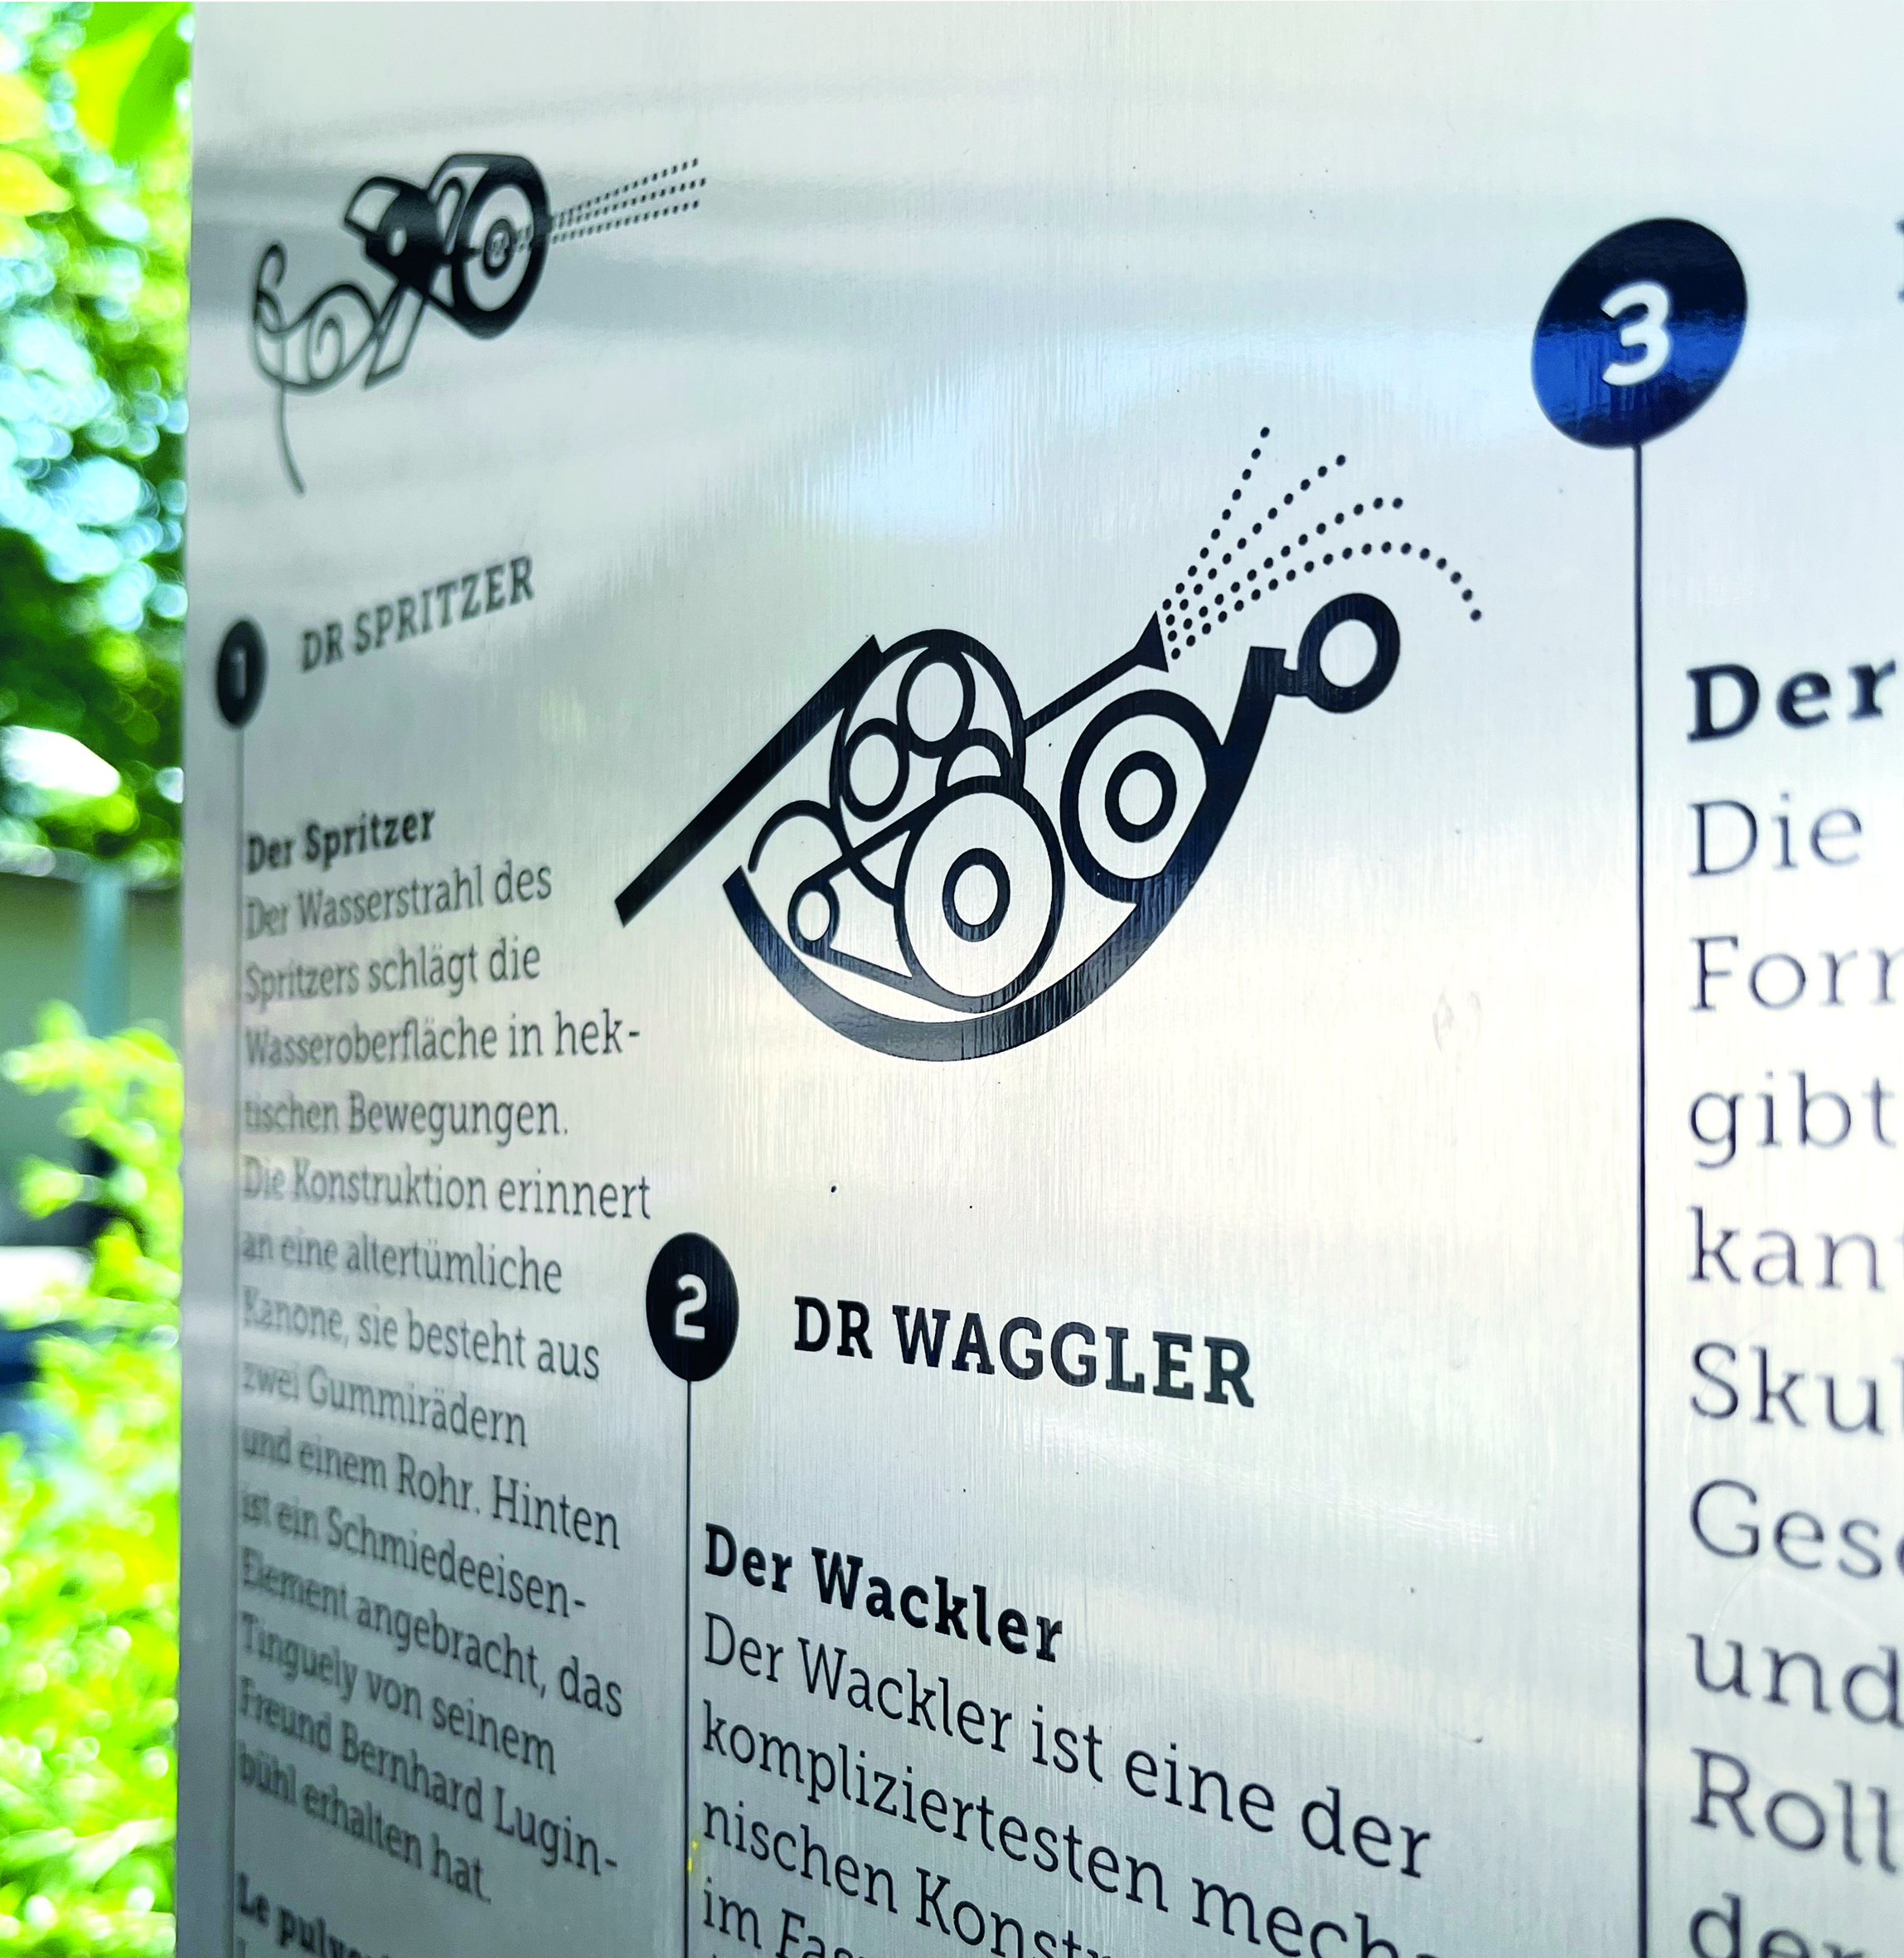 https://sarahweishaupt.ch/media/pages/home/illustrationen-schild-fasnachtsbrunnen-museum-tinguely-basel/e2c791a236-1685531159/img_5102.jpg